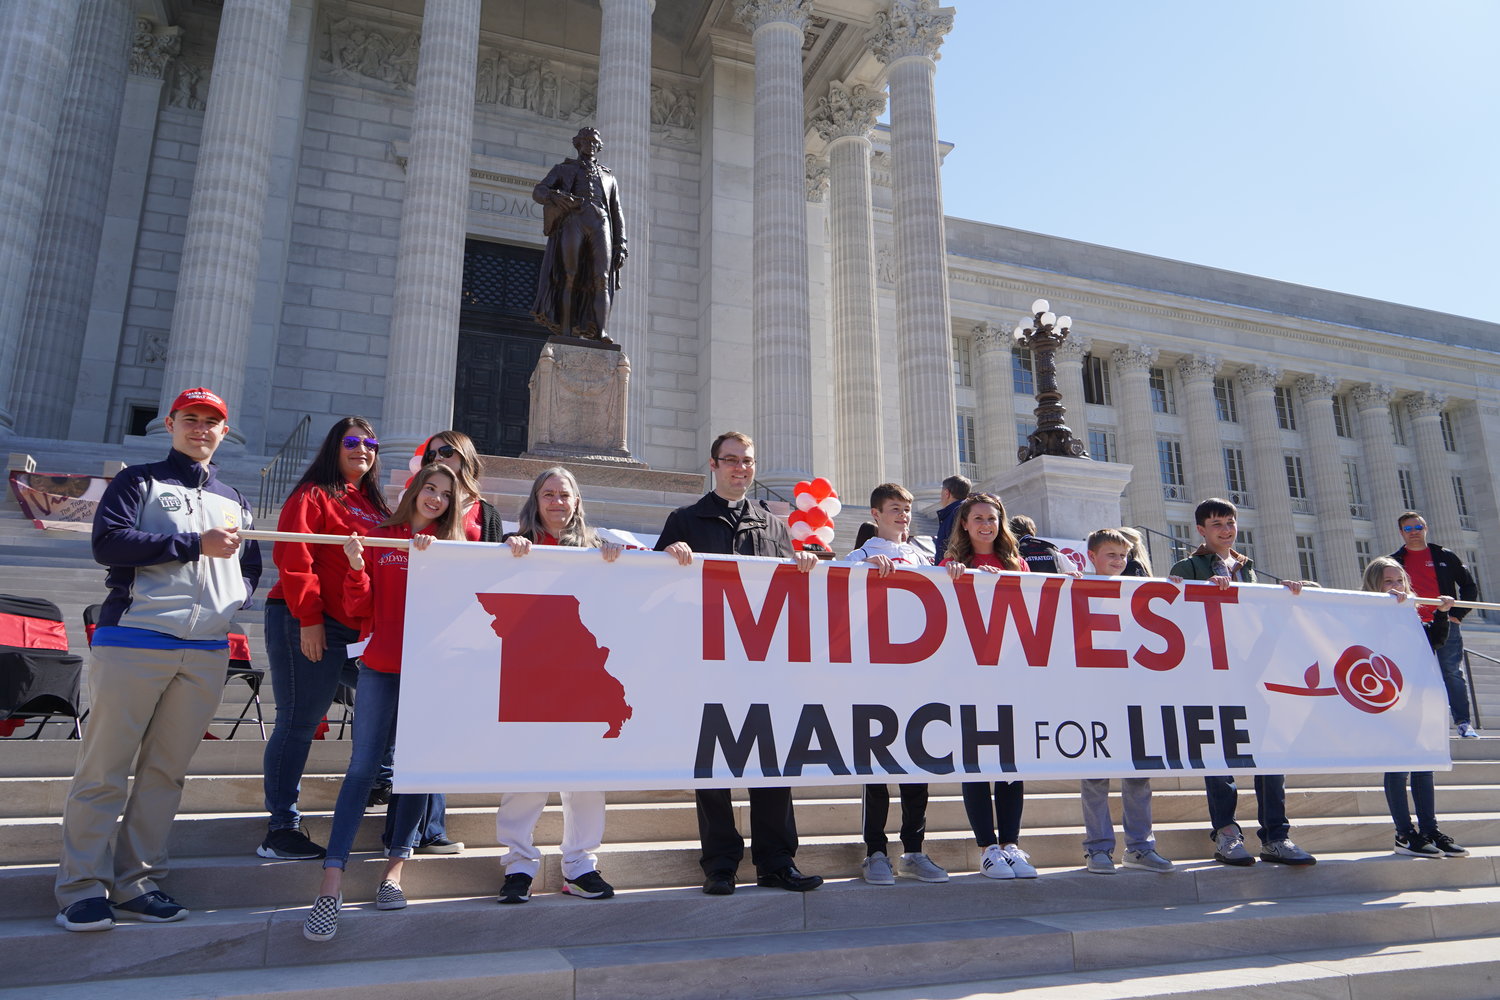 Members of St. Brendan Parish in Mexico, including their pastor, Father Dylan Schrader, carry the Midwest March for Life banner.